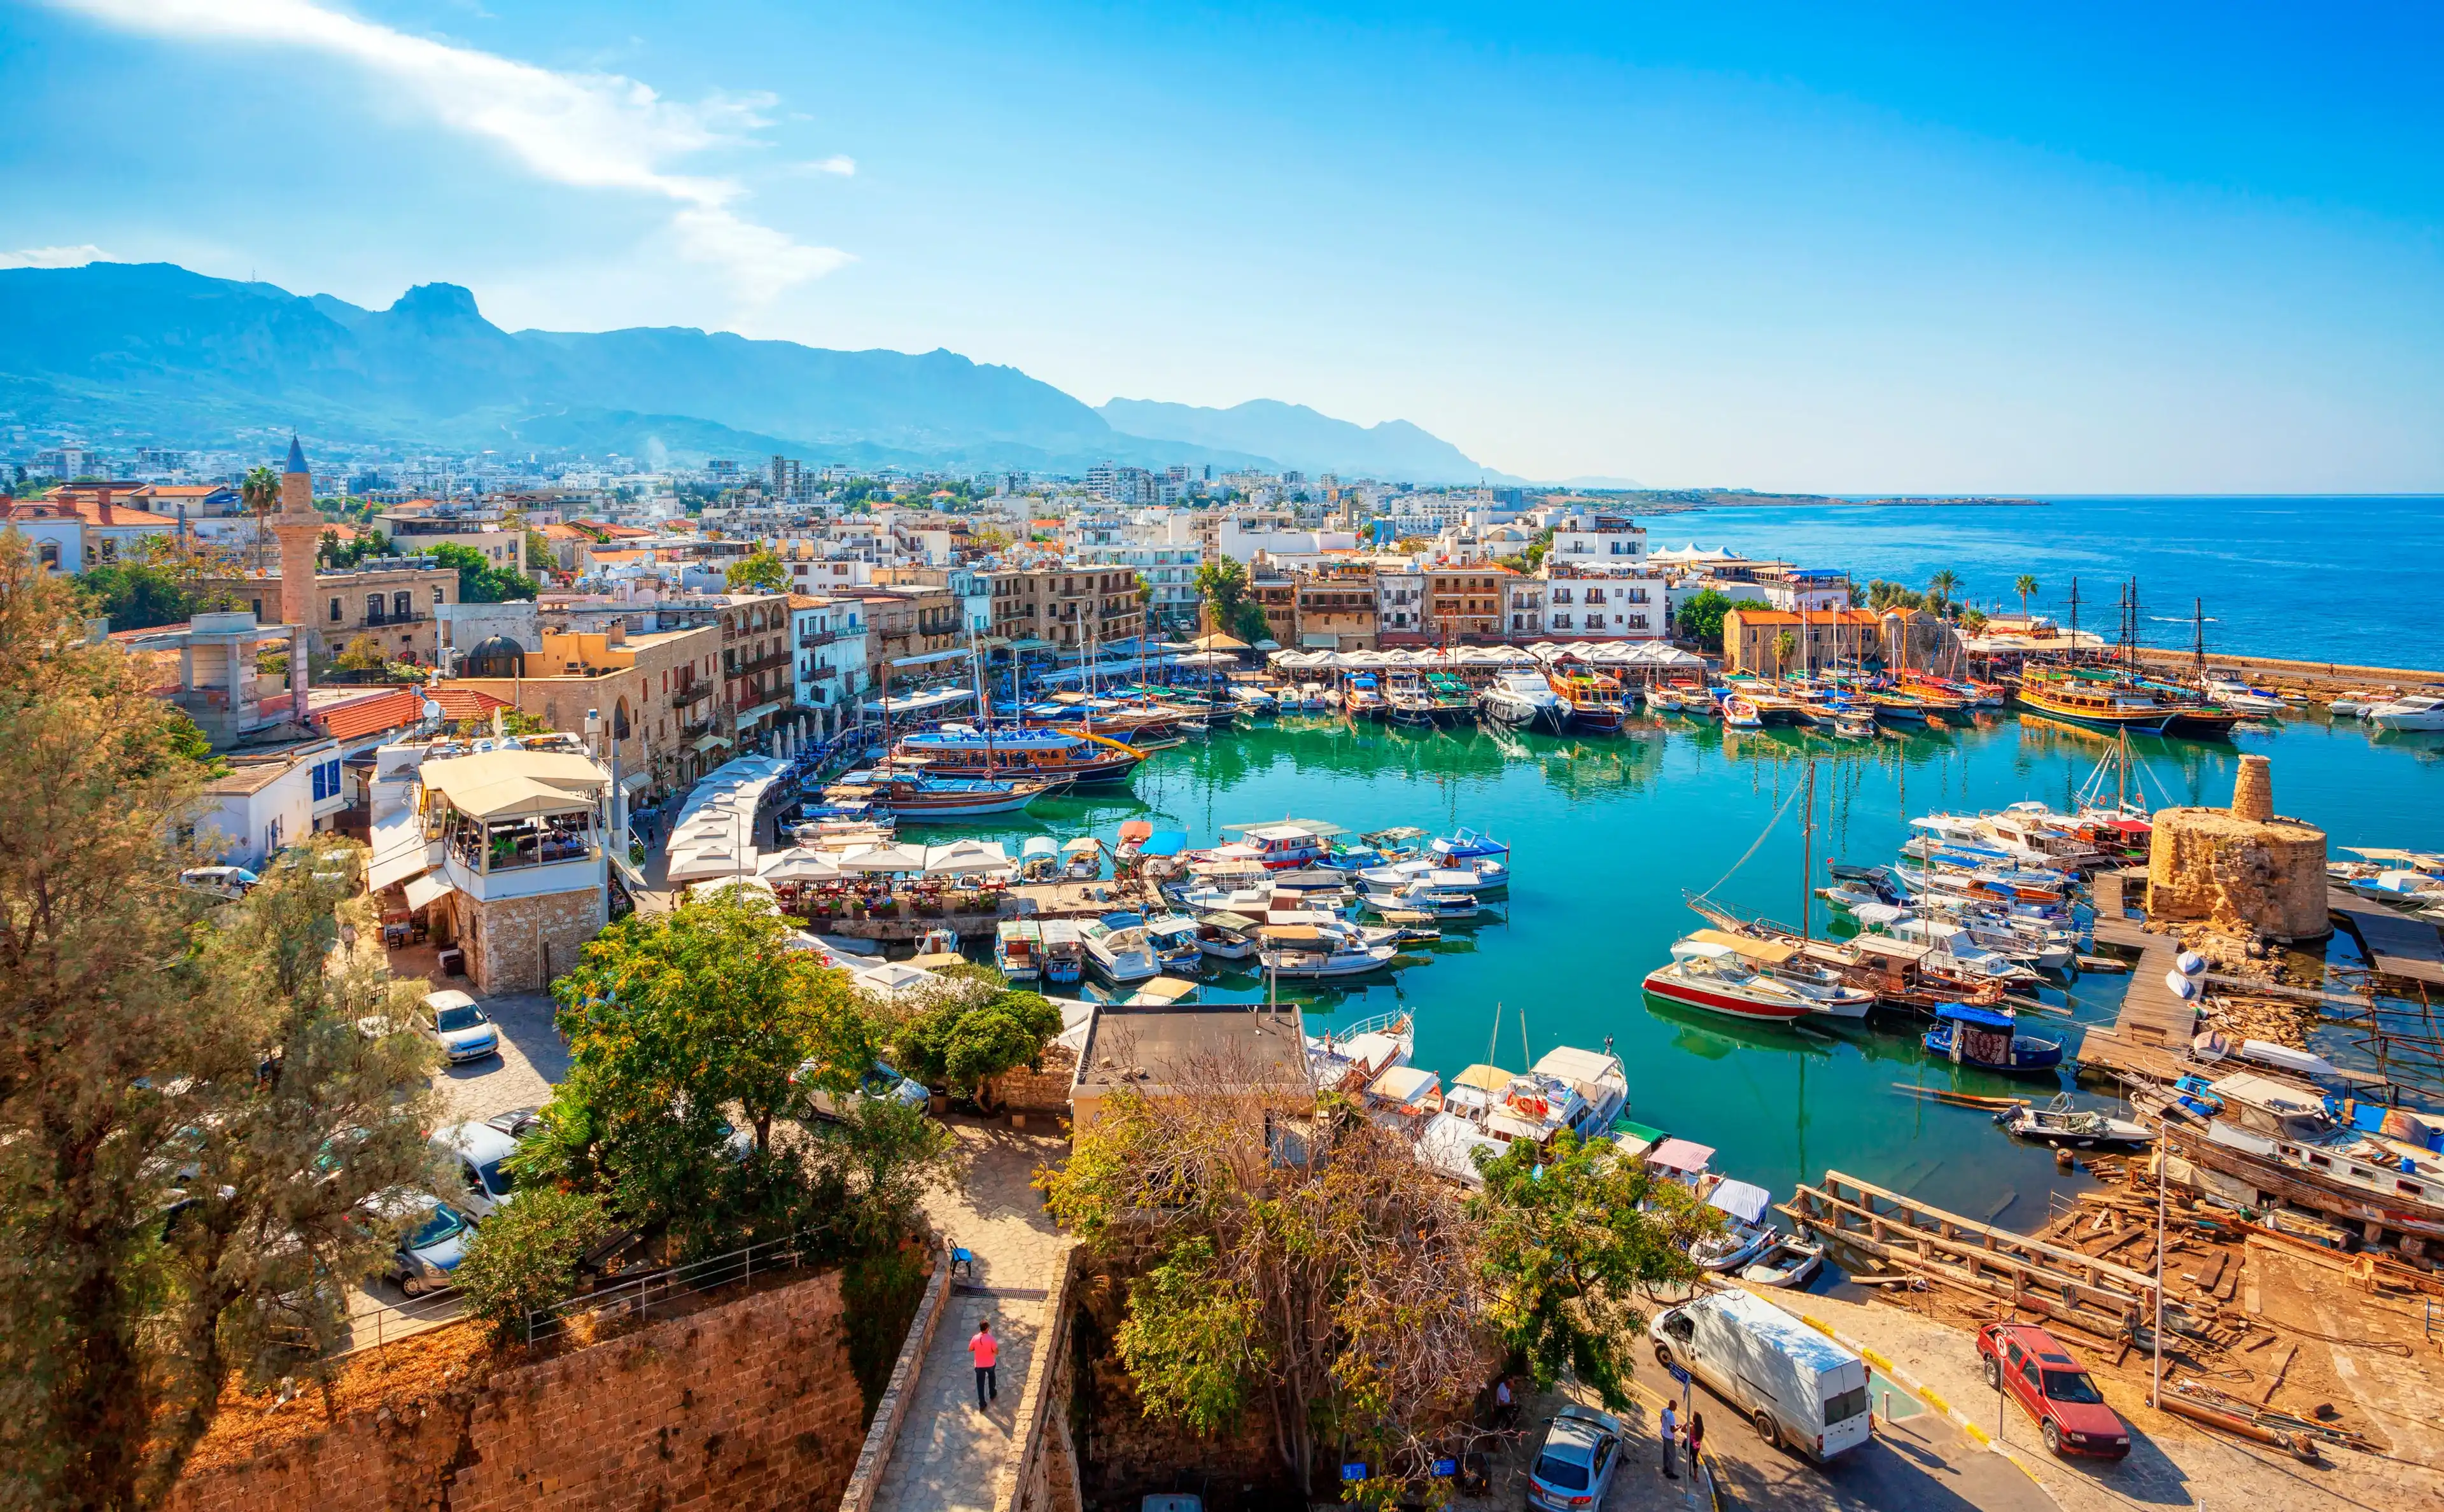 Panoramic view of Kyrenia (Girne) old harbour on the northern coast of Cyprus. Kyrenia seaside of Mediterranean Sea, Cyprus. Famous places and travel destination of Kyrenia, Cyprus